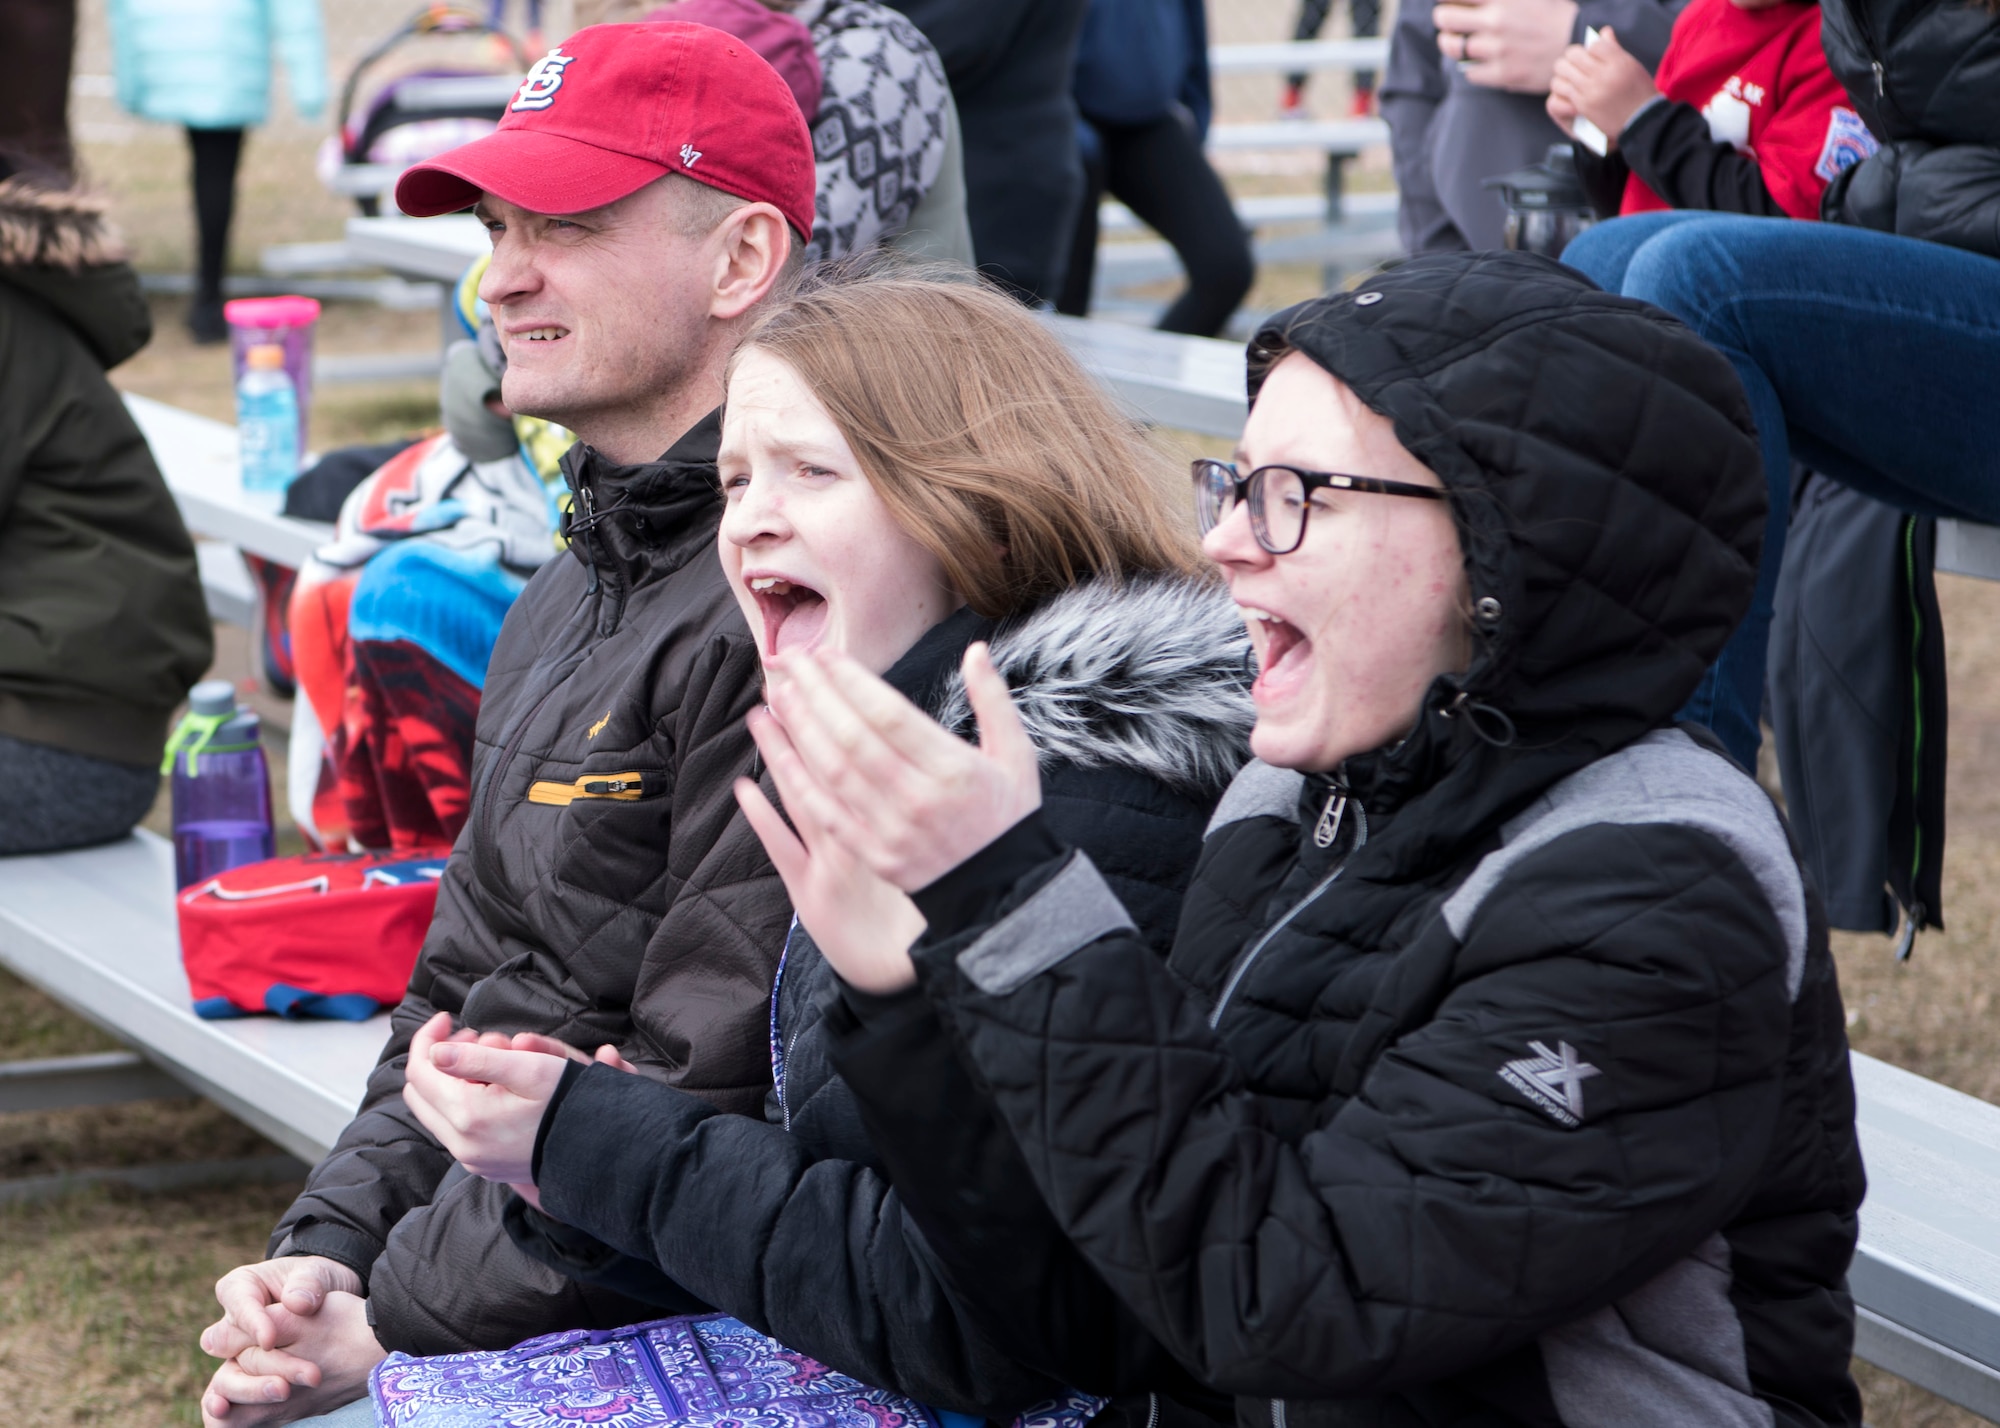 Members of the Jeppson family cheer on players during a Little League opening day game at Joint Base Elmendorf-Richardson, Alaska, May 12, 2018. The games started immediately following the 2018 season opening day ceremony and continued throughout the day. The Fort Richardson Little League started in 1951 and has a continued deep-rooted history at JBER.